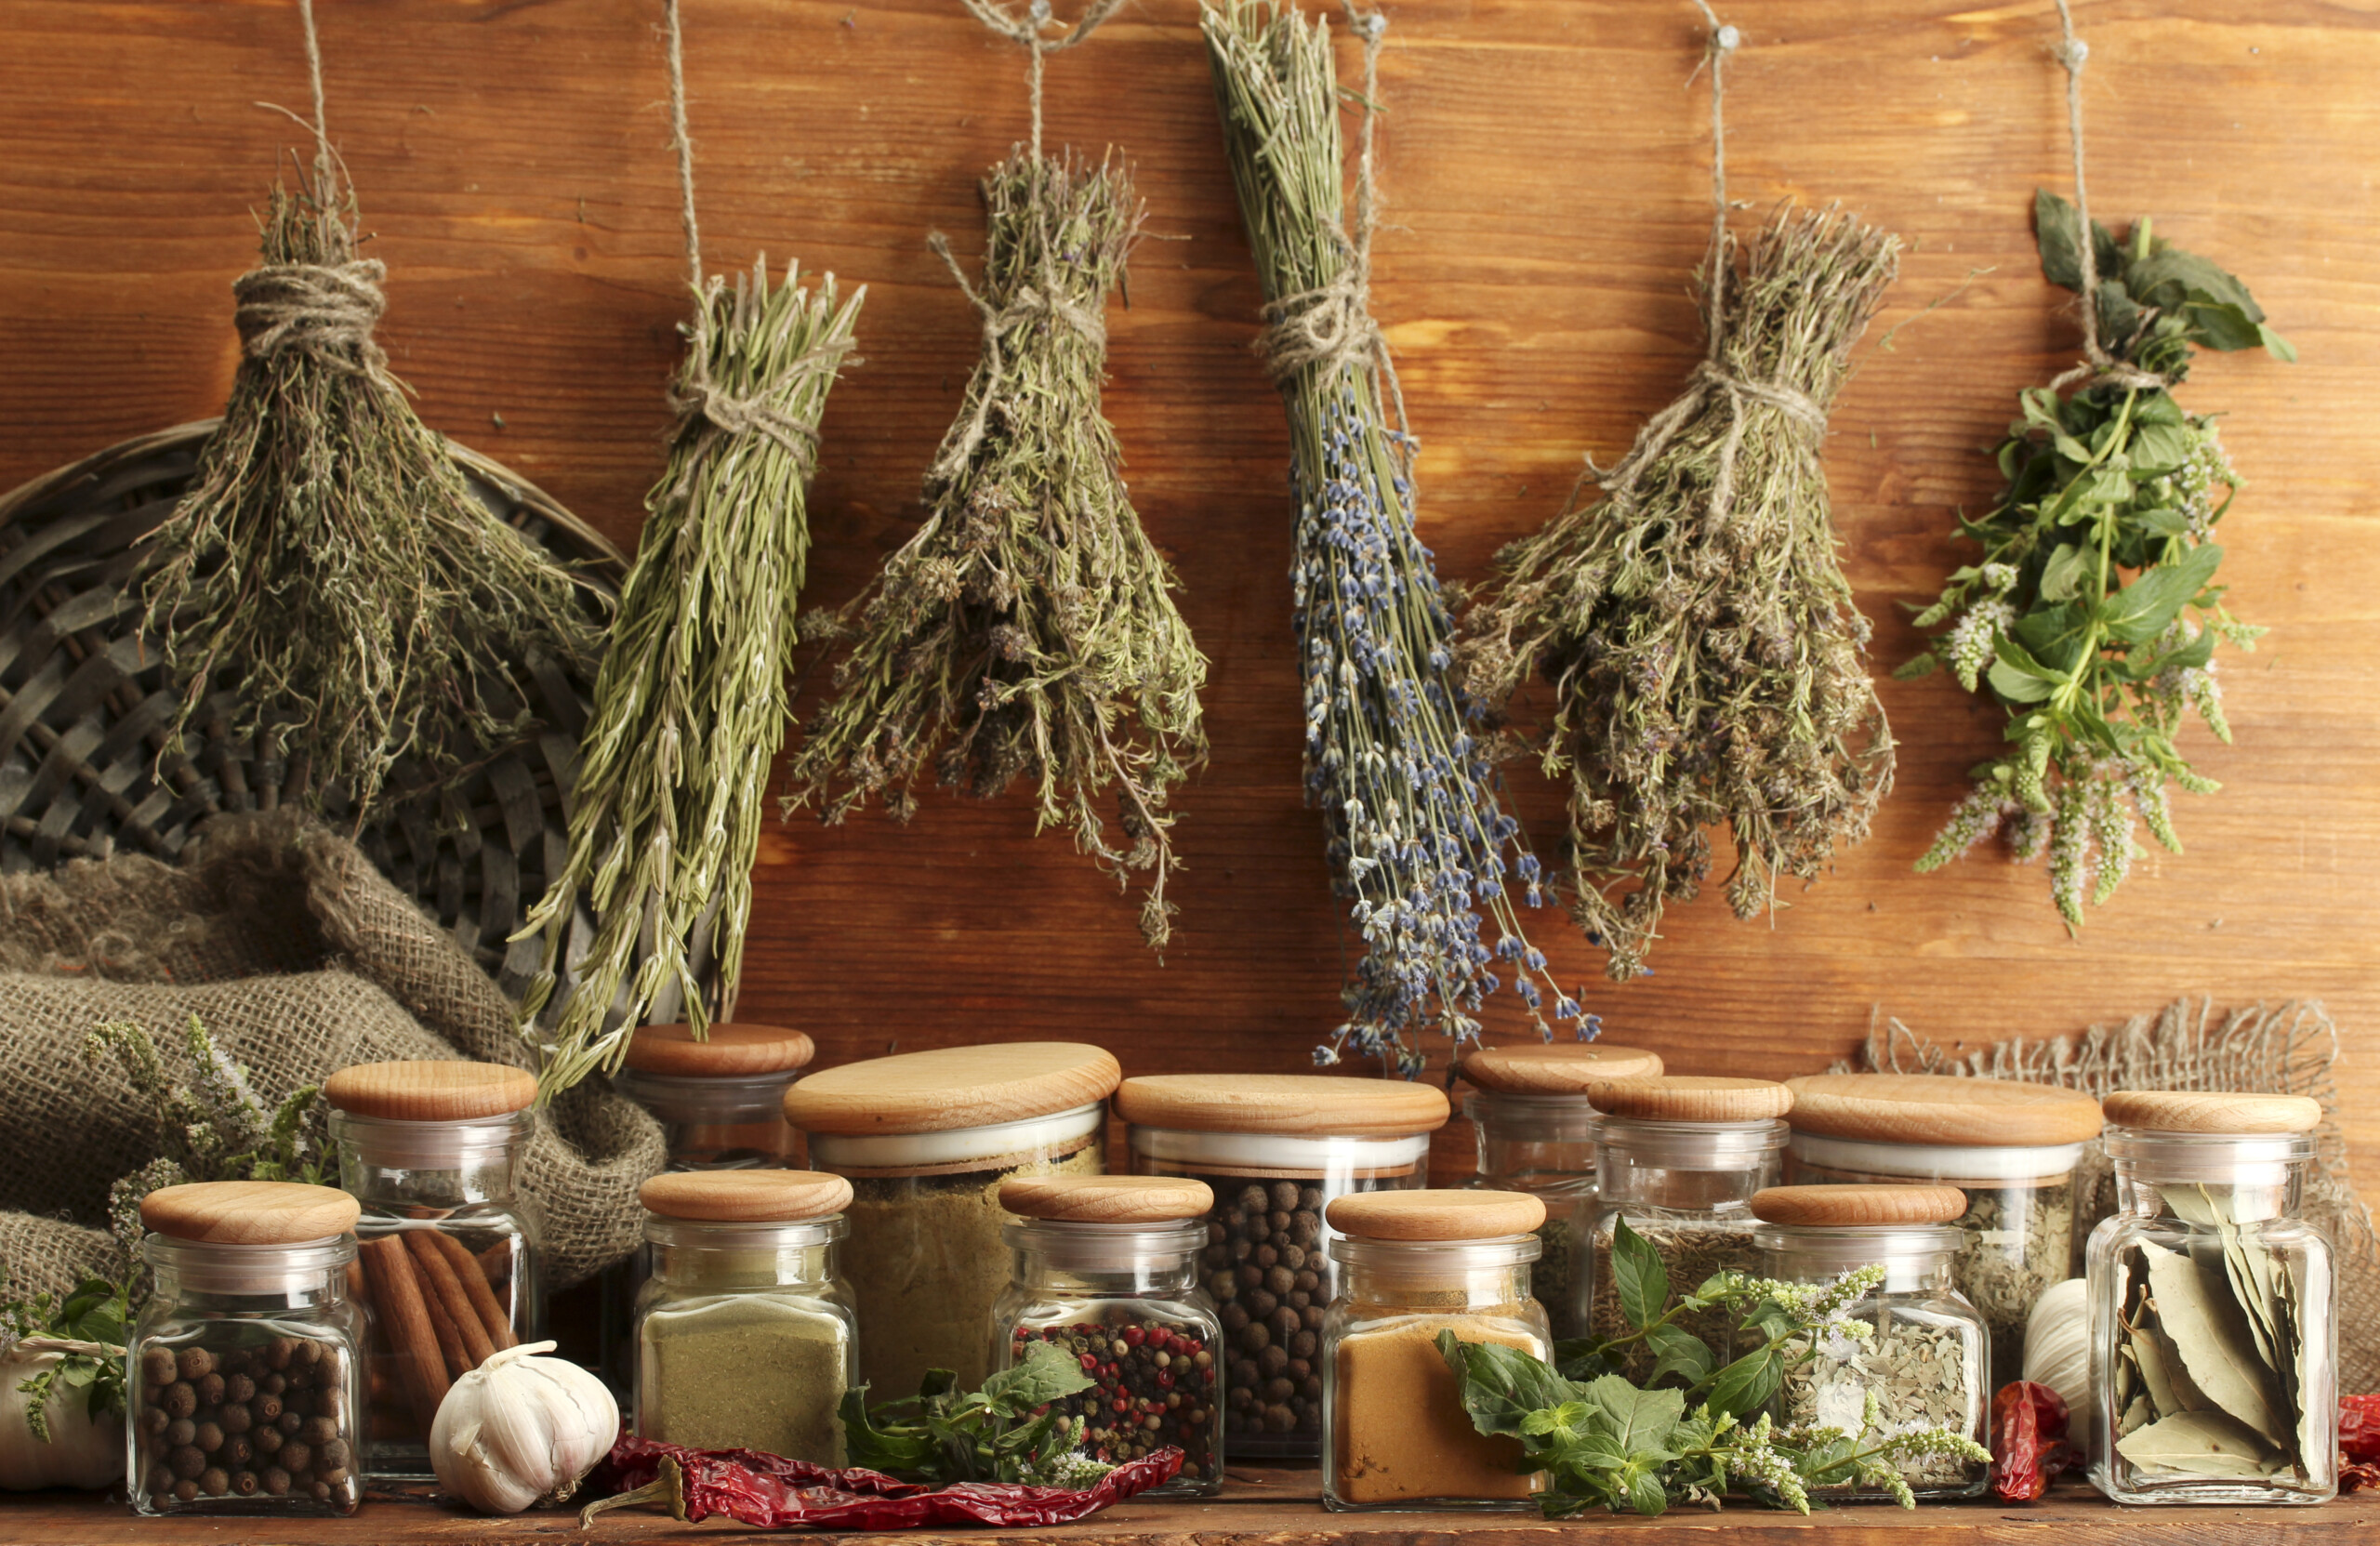 Dried,Herbs,,Spices,And,And,Pepper,,On,Wooden,Background